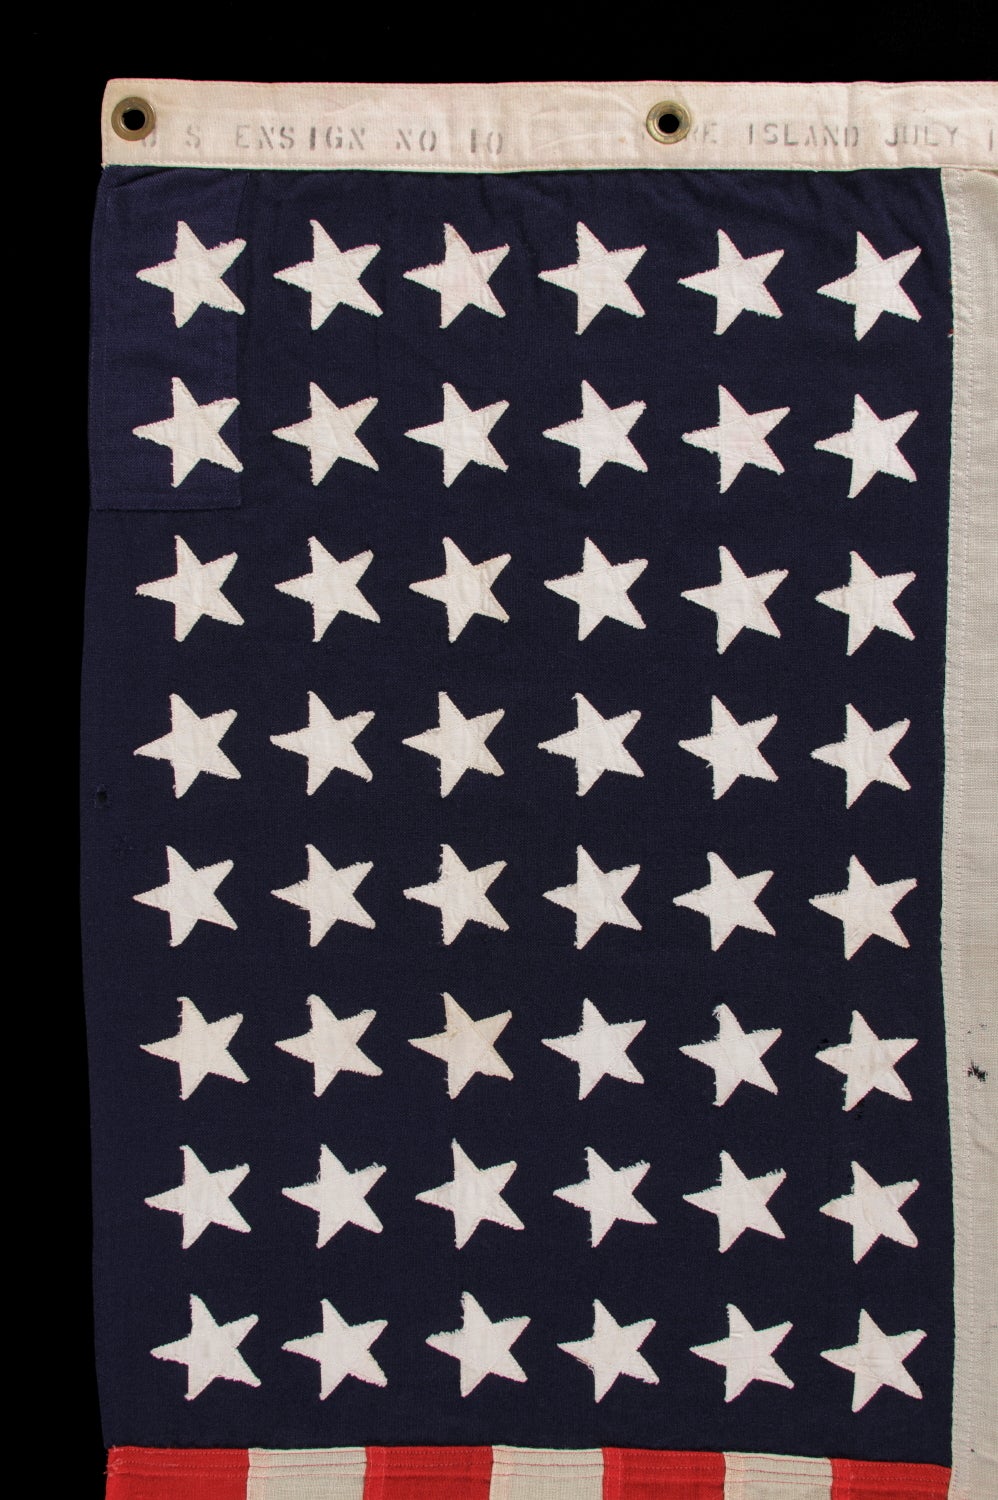 48 STAR, U.S. NAVY SMALL BOAT ENSIGN WITH AN ATTRACTIVE, ELONGATED FORMAT, MADE AT MARE ISLAND, CALIFORNIA DURING WWII, SIGNED AND DATED JULY, 1943:

48 star American national flag, made during World War II (U.S. involvement 1941-45) and signed